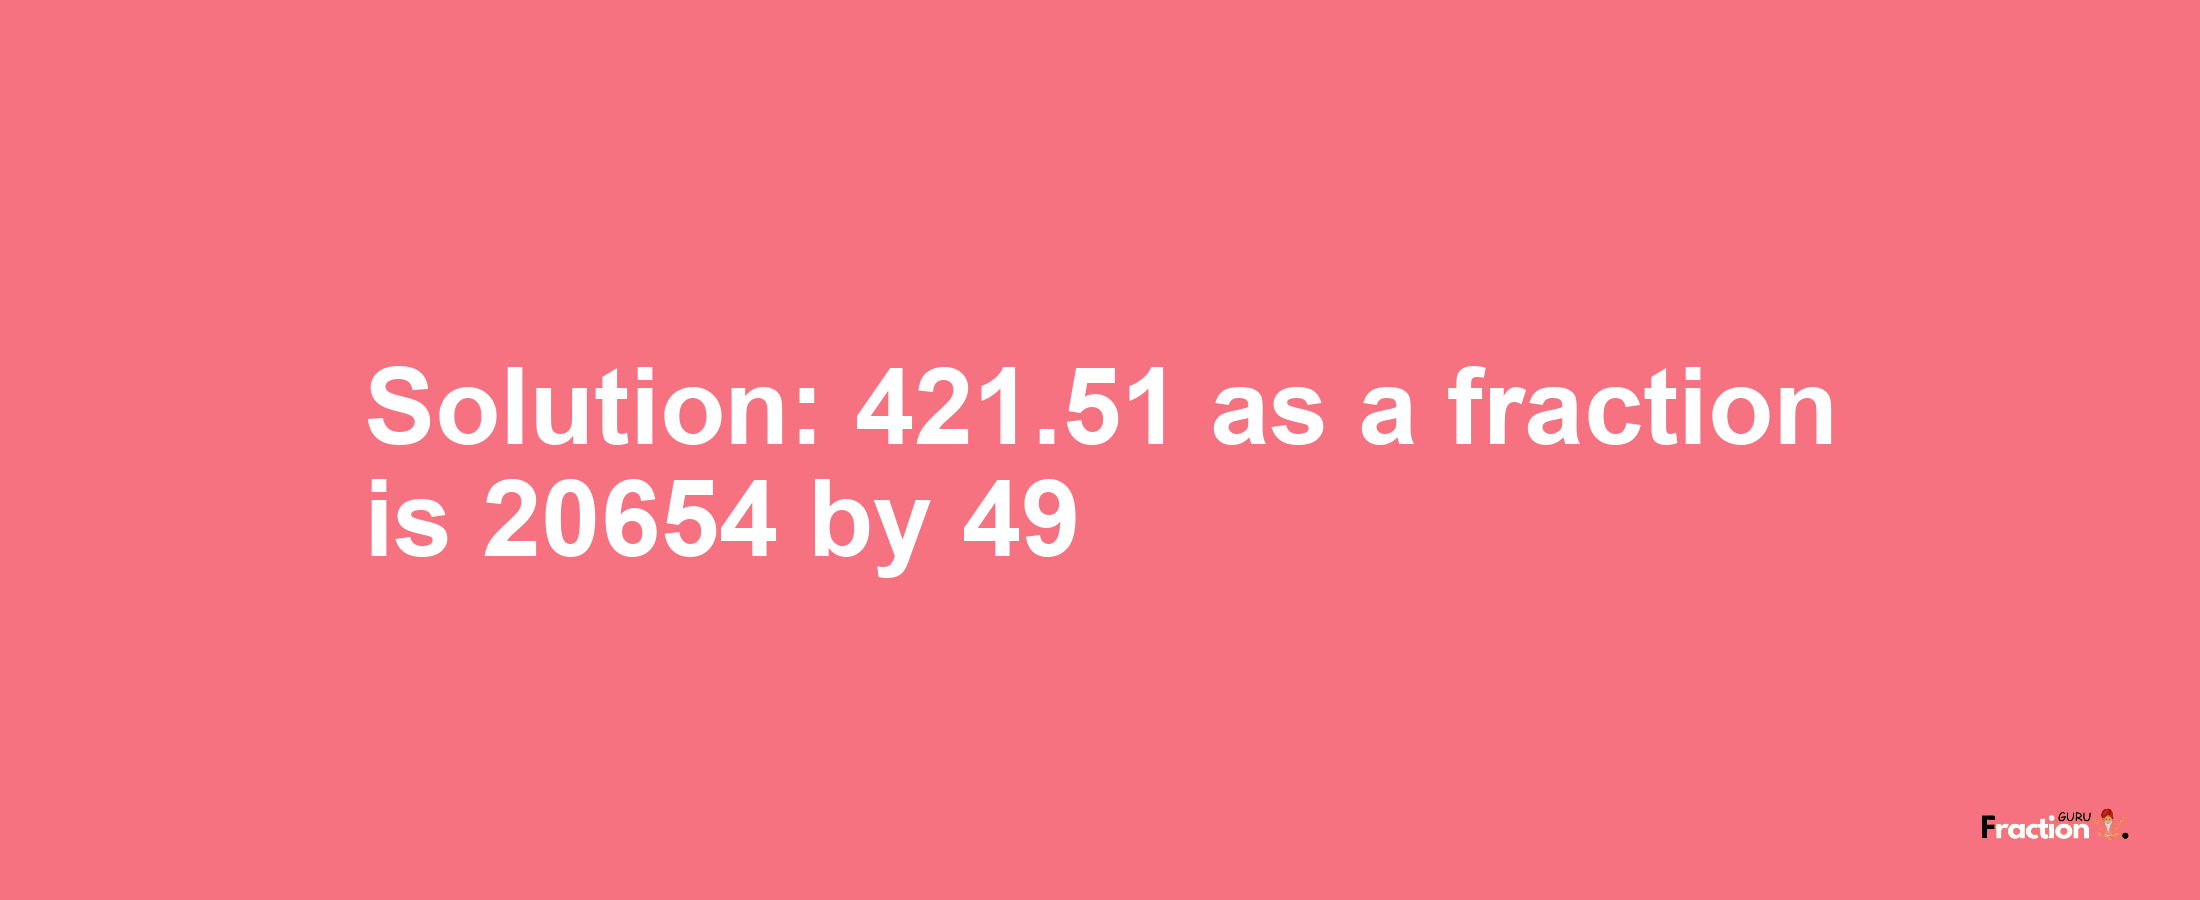 Solution:421.51 as a fraction is 20654/49